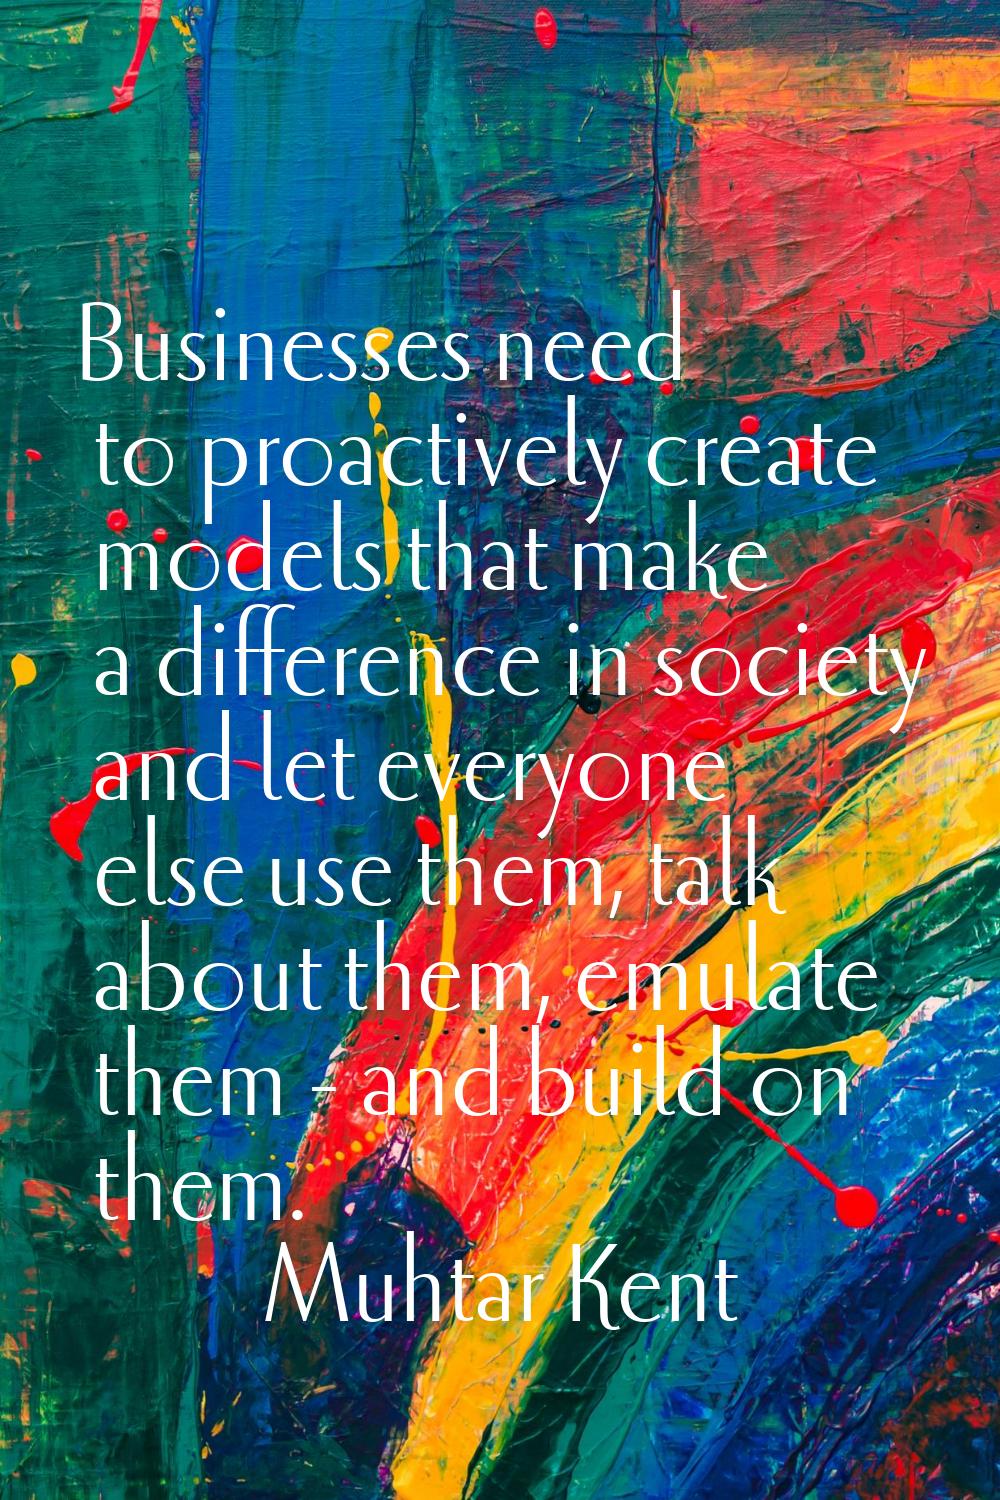 Businesses need to proactively create models that make a difference in society and let everyone els